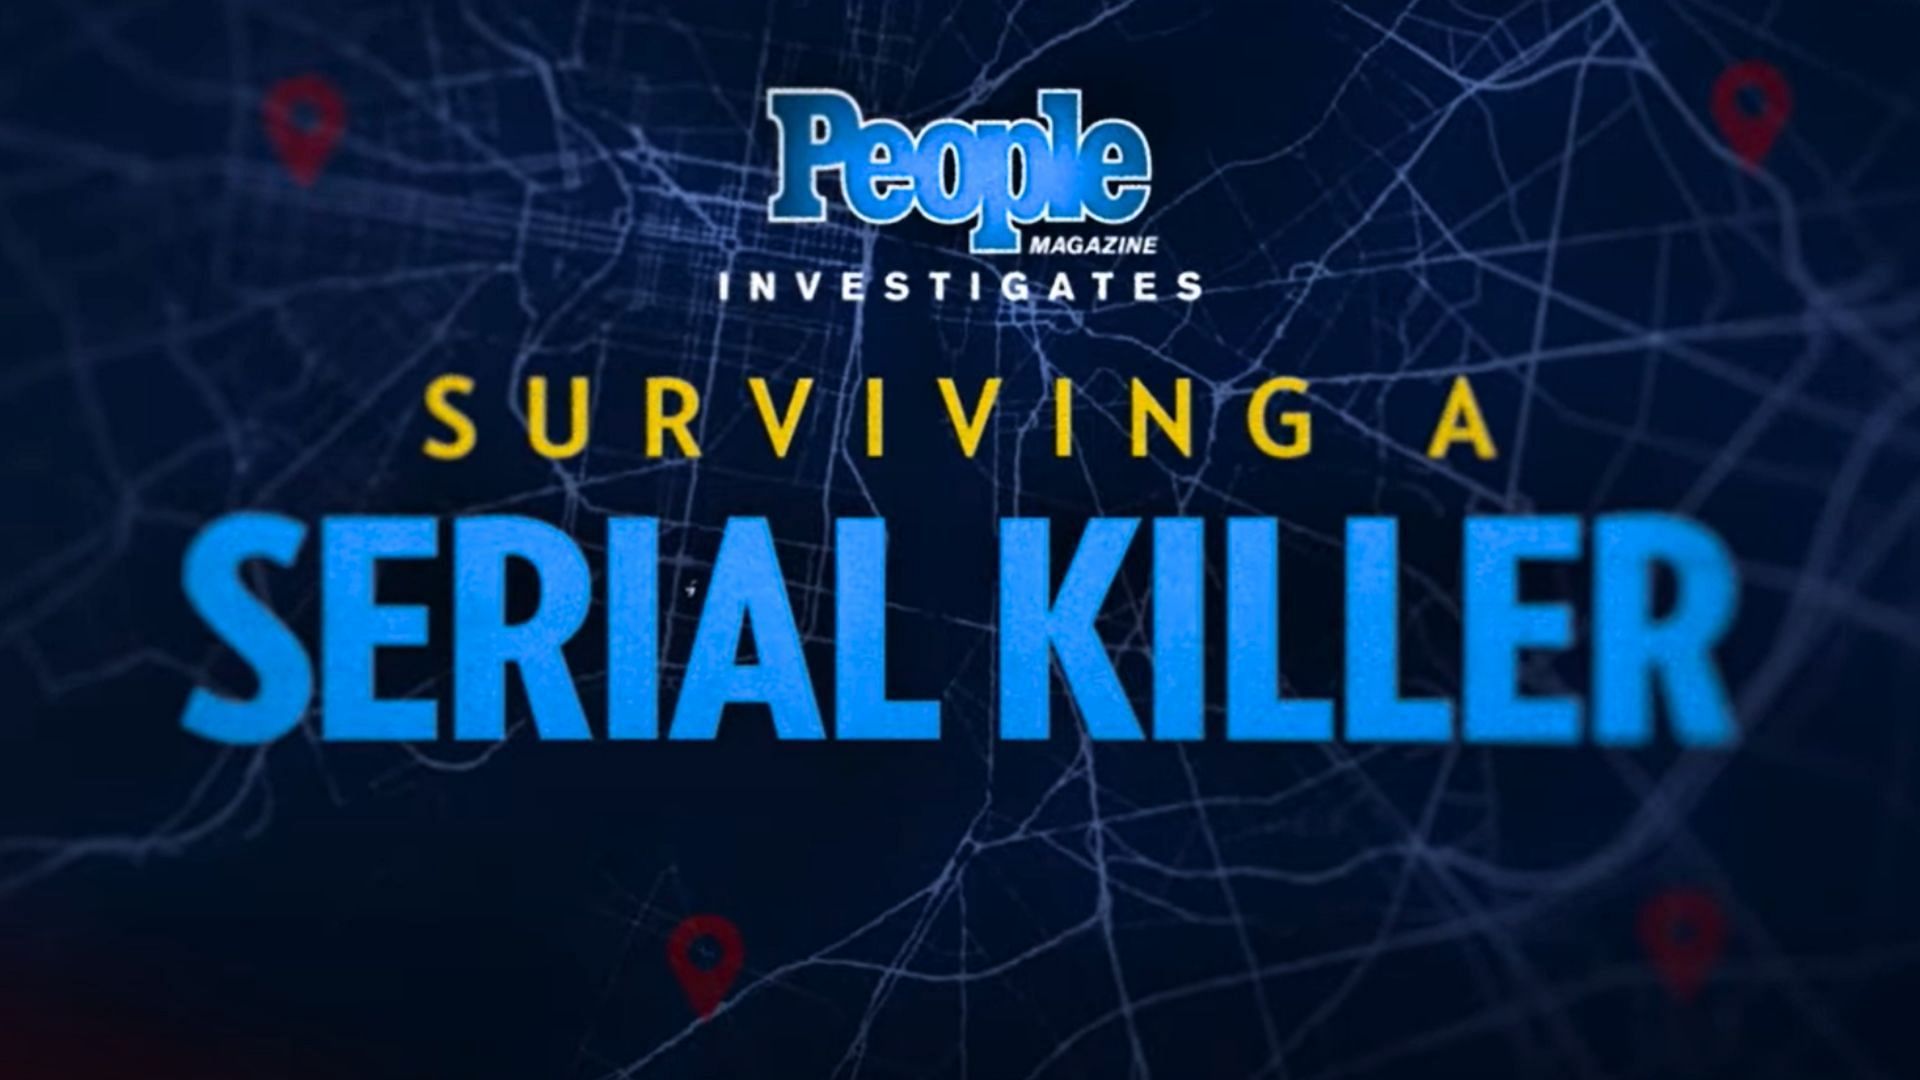 A poster of the ID series People Magazine Investigates: Surviving a Serial Killer (image via Investigation Discovery)